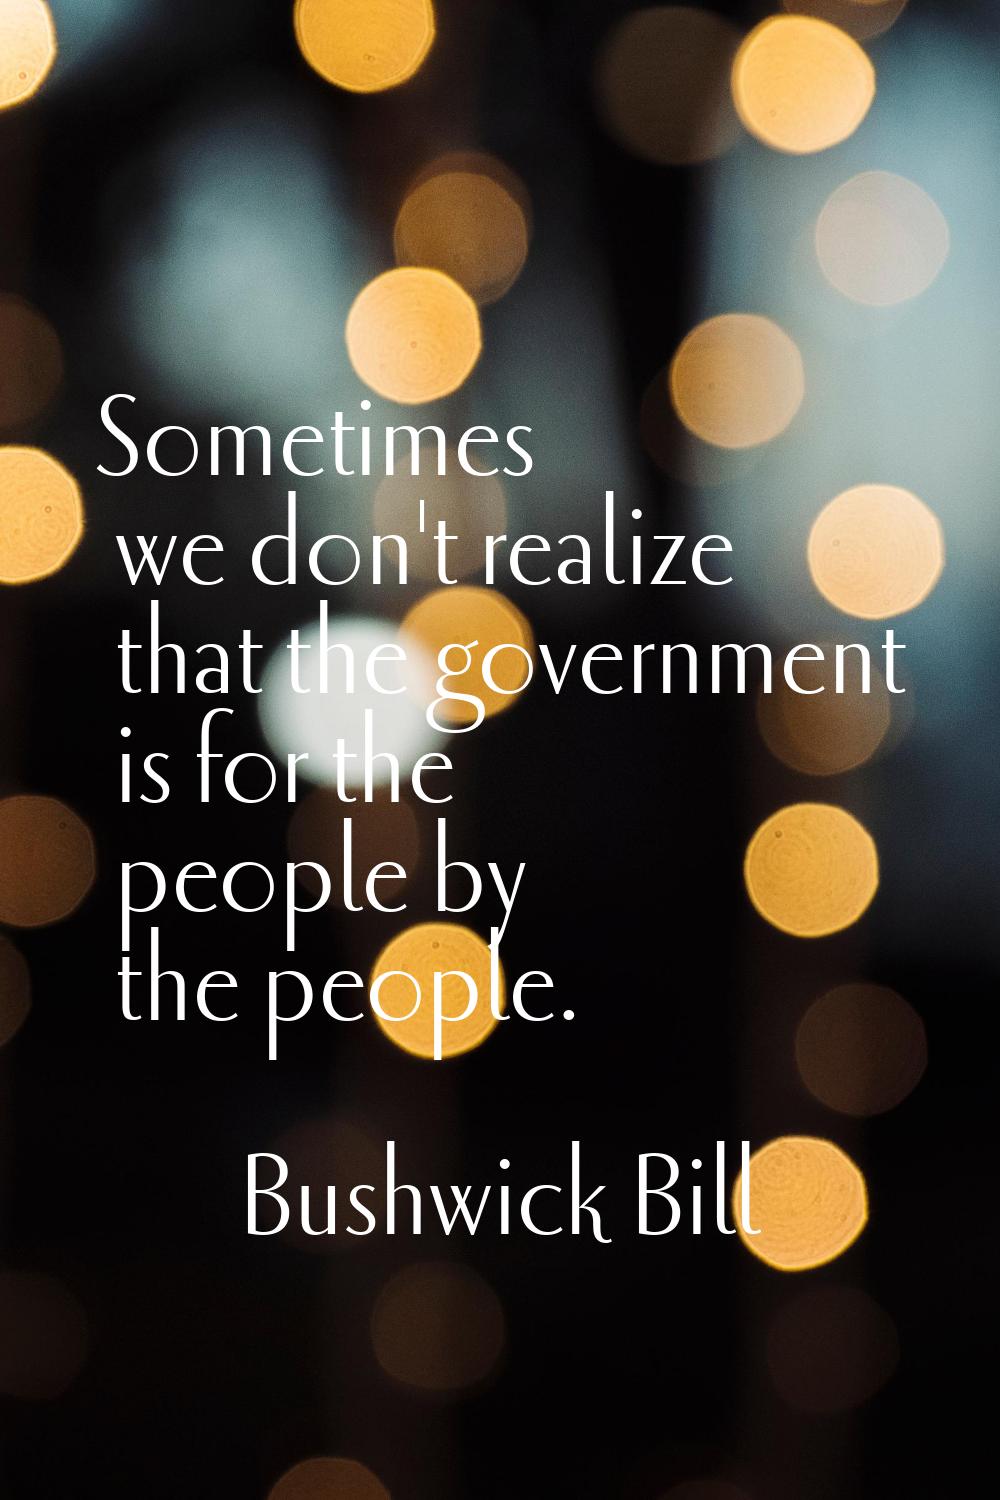 Sometimes we don't realize that the government is for the people by the people.